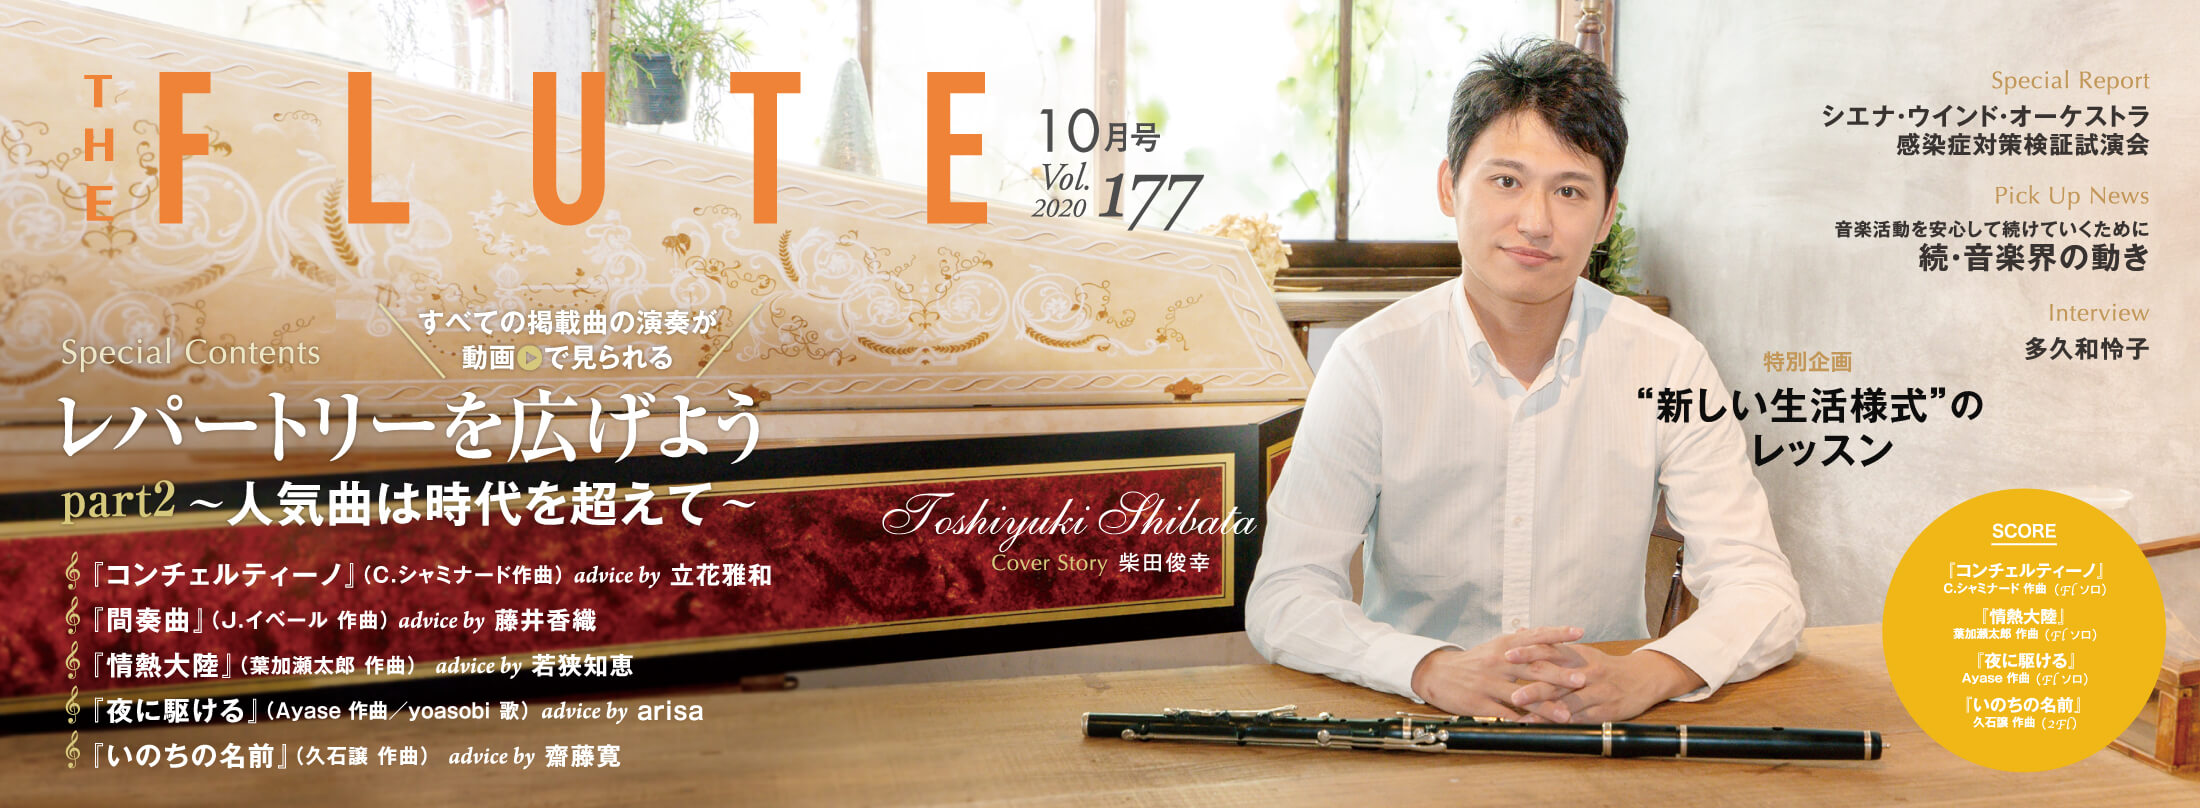 THE FLUTE177